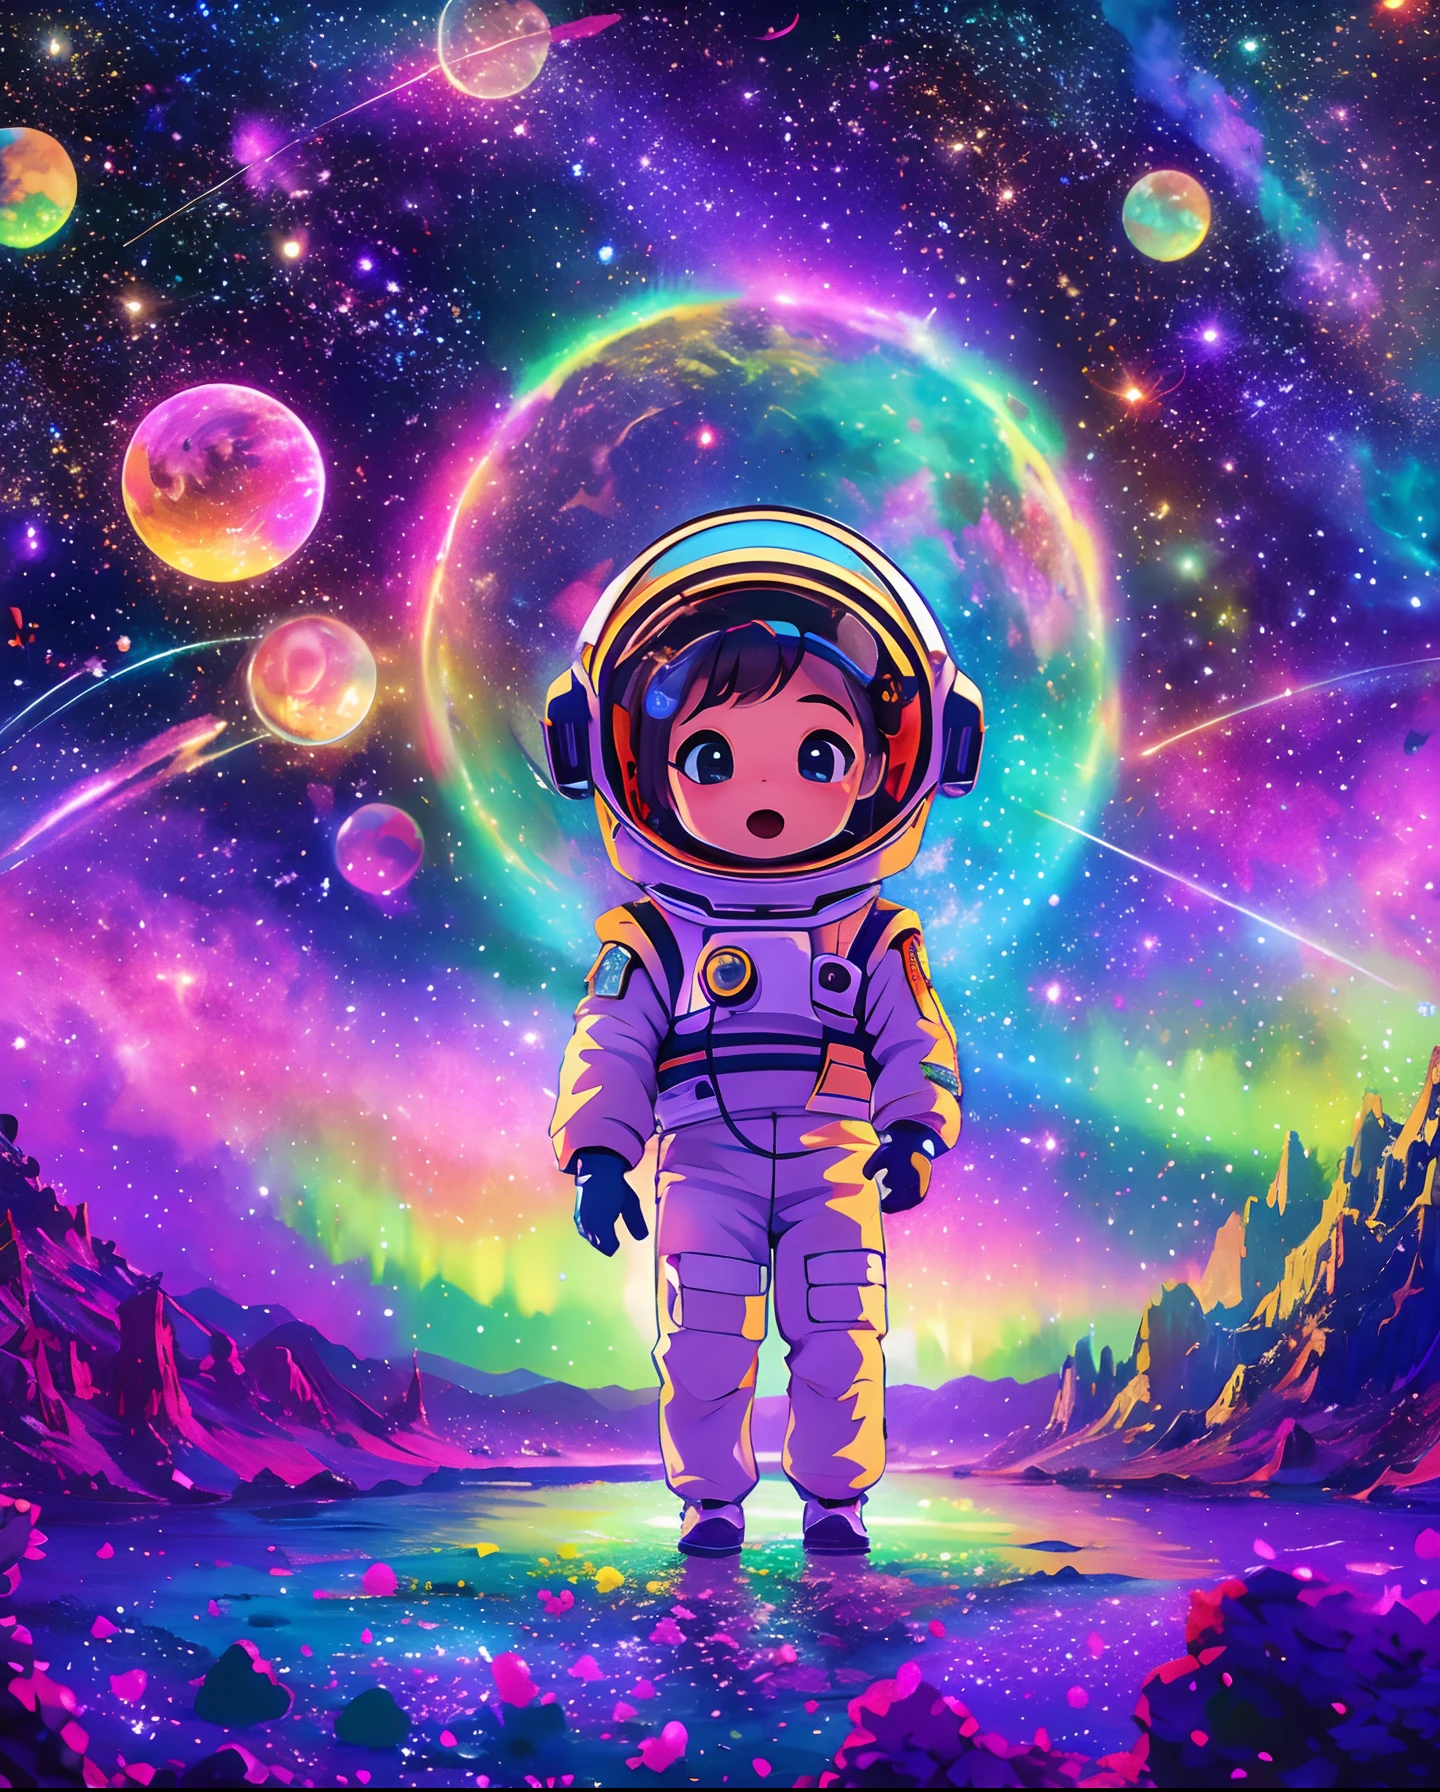 "A stunning masterpiece of an 8k raw image featuring a chibi astronaut surrounded by a mesmerizing starry sky, vibrant aerial fireworks, and the breathtaking spectacle of the aurora dancing in the Milky Way. This official art captures the beauty, aesthetic, and animation of a festival-like atmosphere with a touch of fisheye lens effect. It is truly a top-quality and best-quality depiction of lovestar's dreamy world."